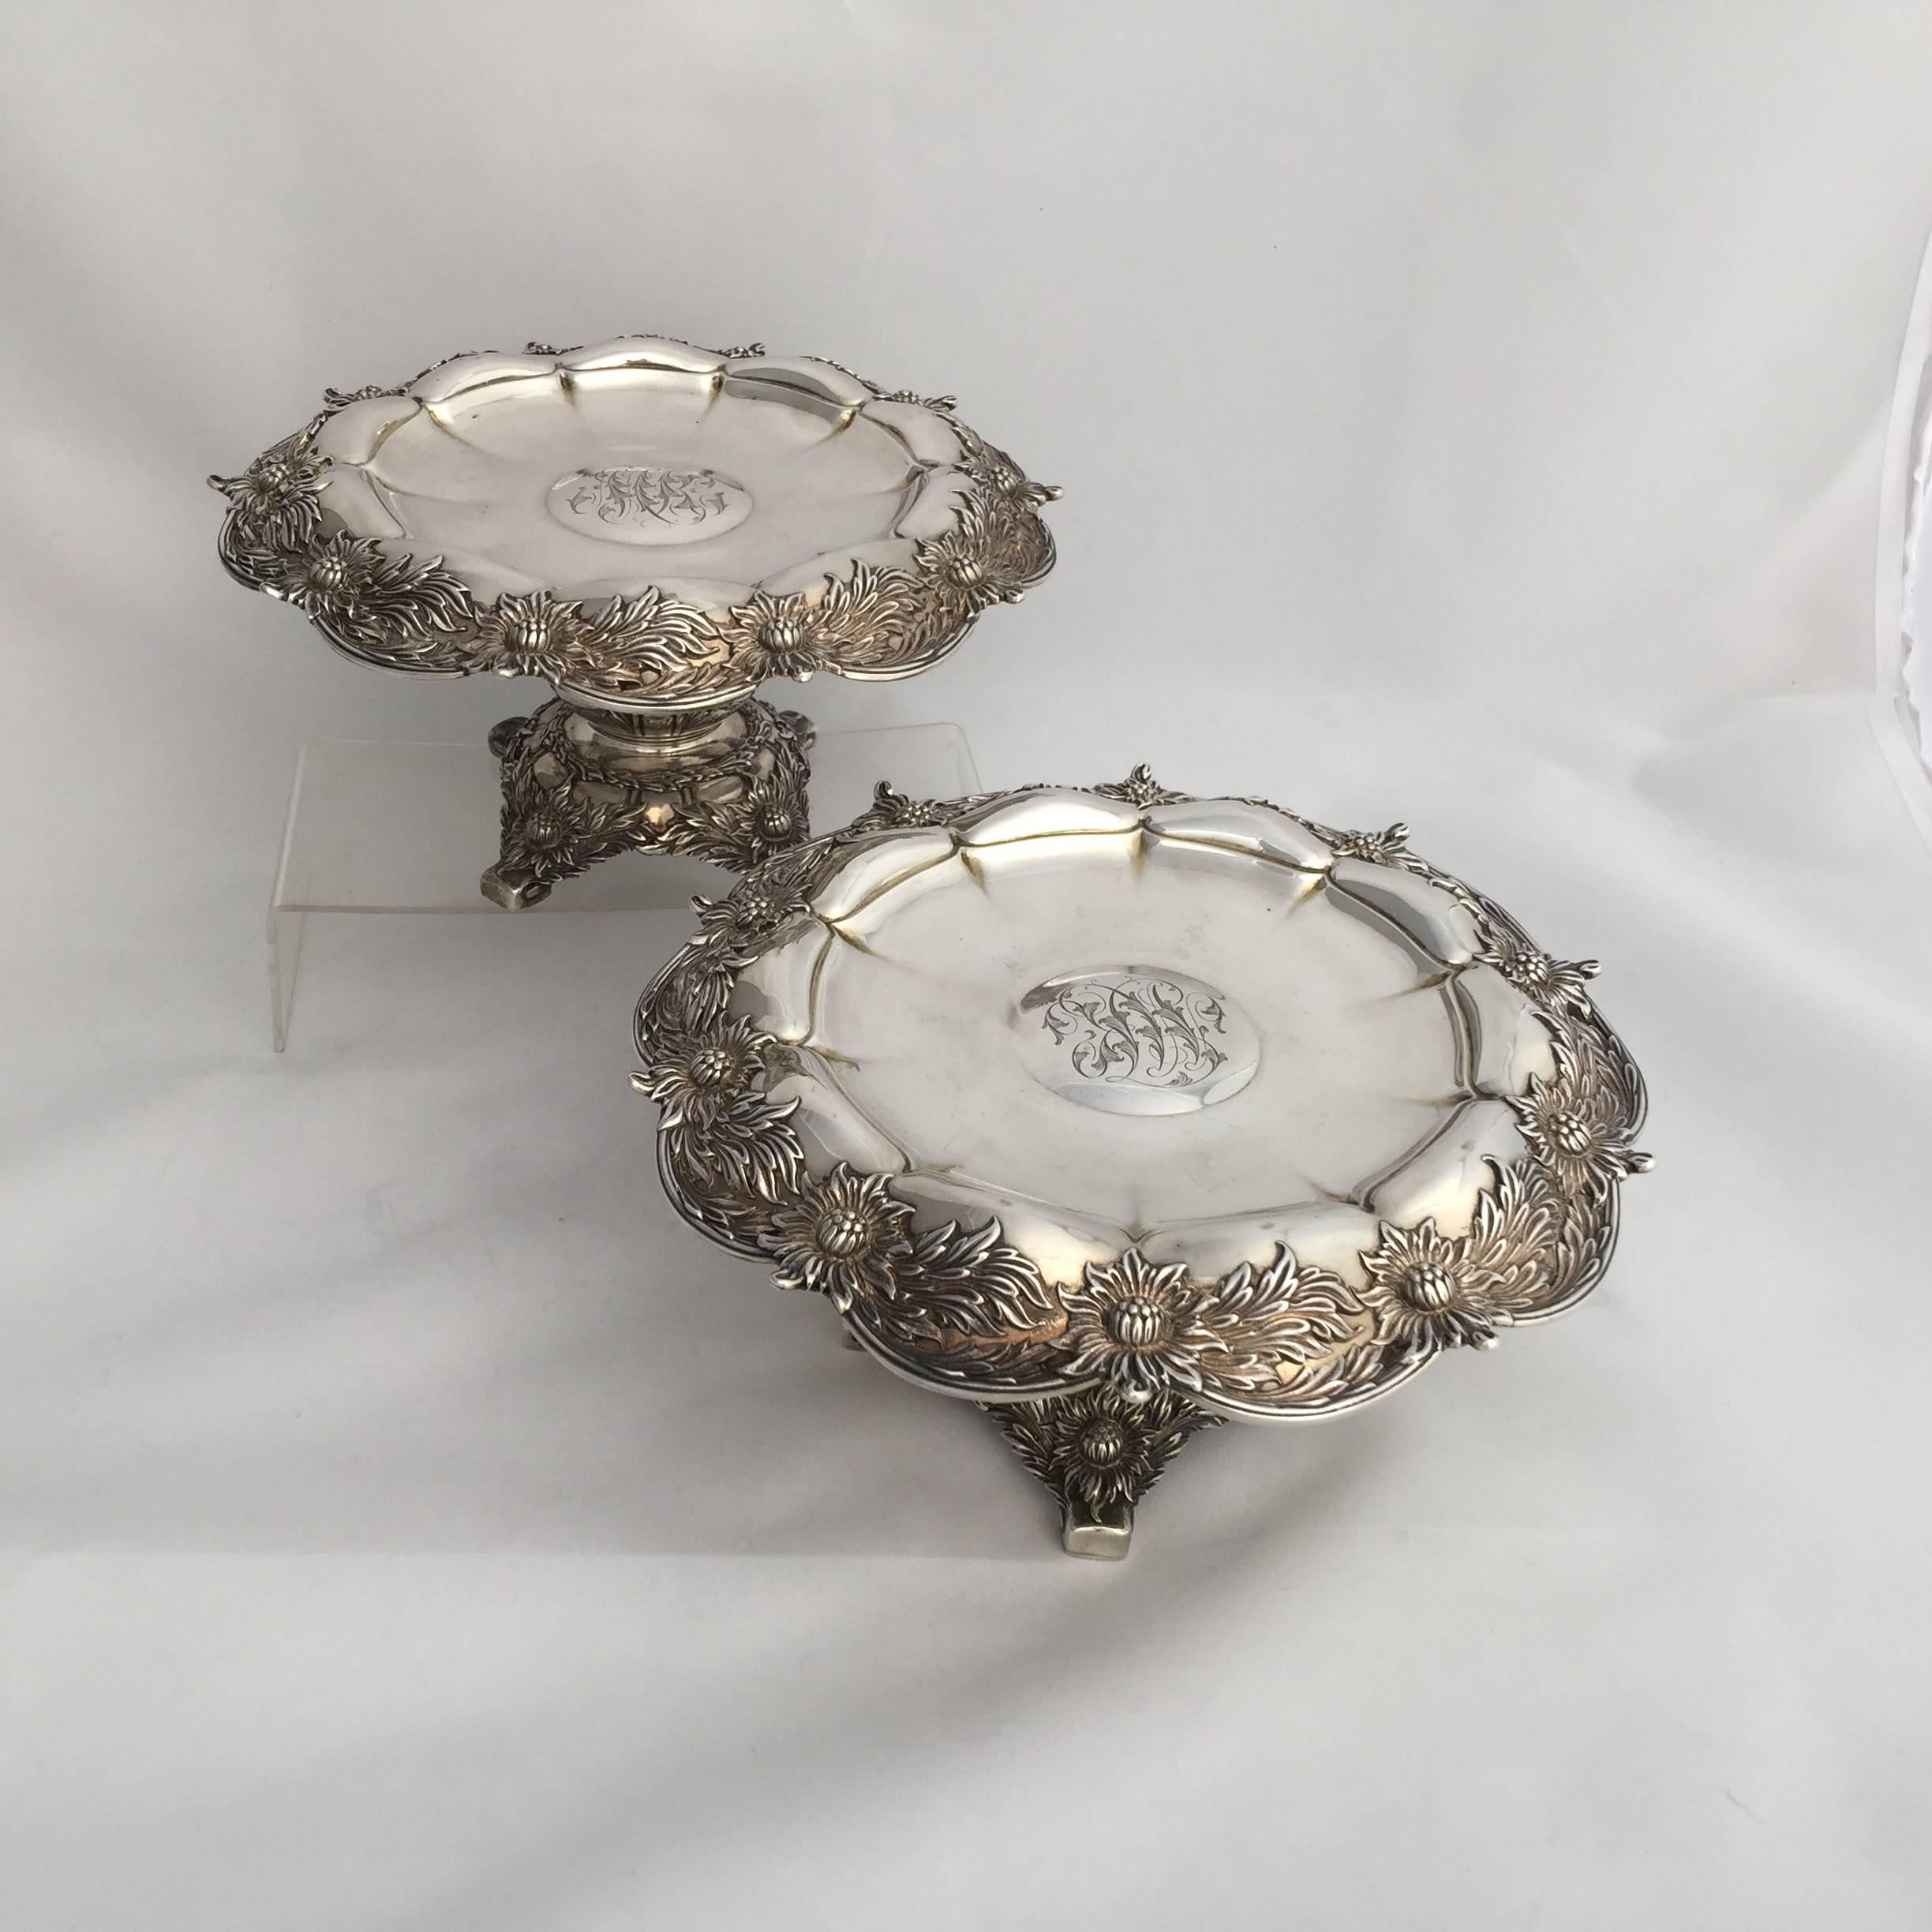 A pair of Tiffany sterling silver chrysanthemum tazzas.
The tops of the tazzas have scalloped rims with molded chrysanthemum borders. The stems of the pieces are bulbous decorated with acanthus, over a chrysanthemum molded base resting on four